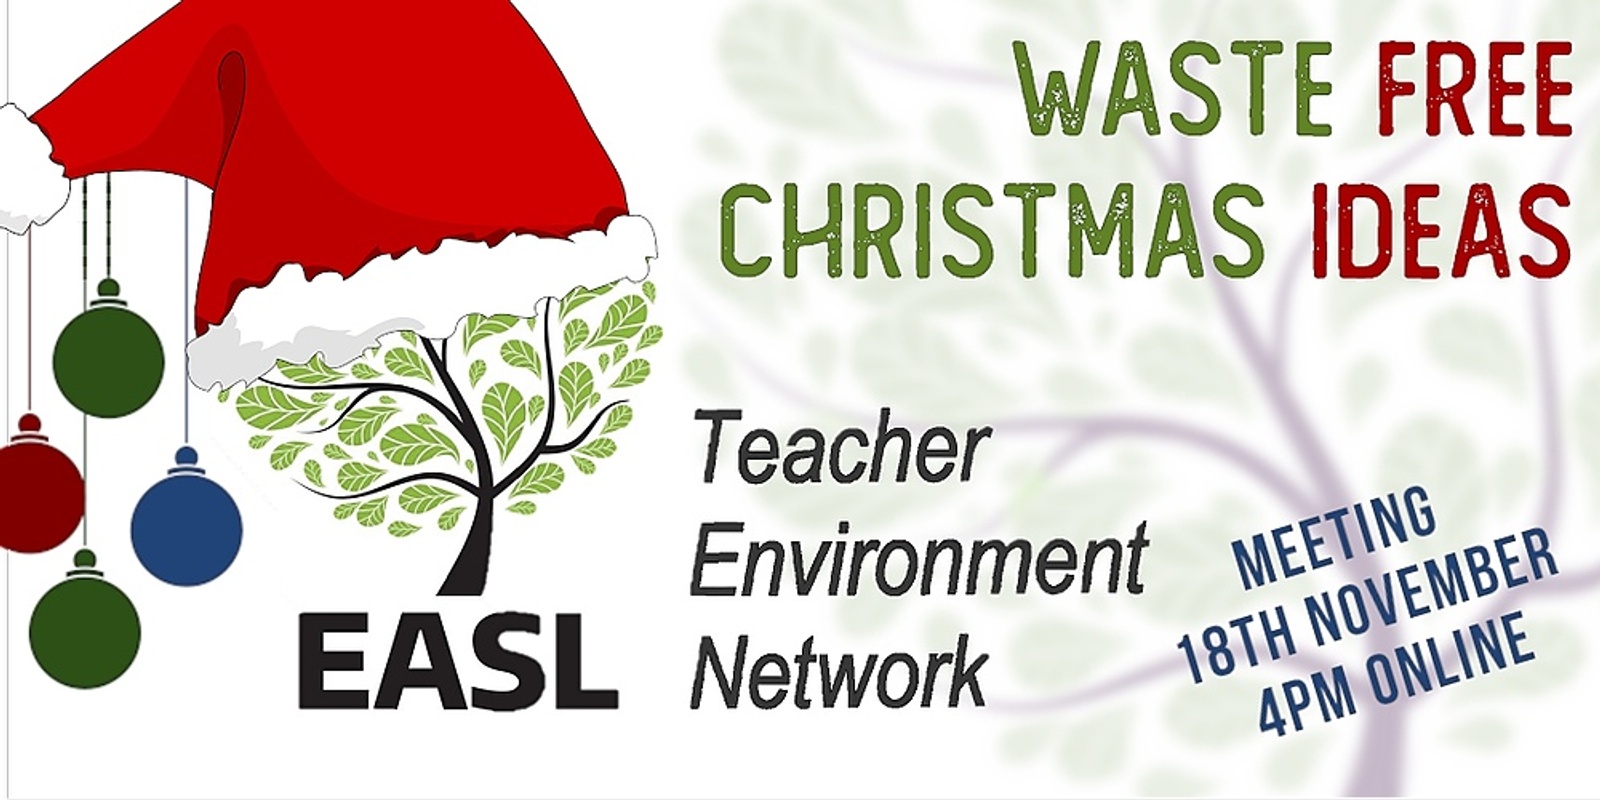 Banner image for Waste Free Christmas Ideas: EASL TEN MEETING